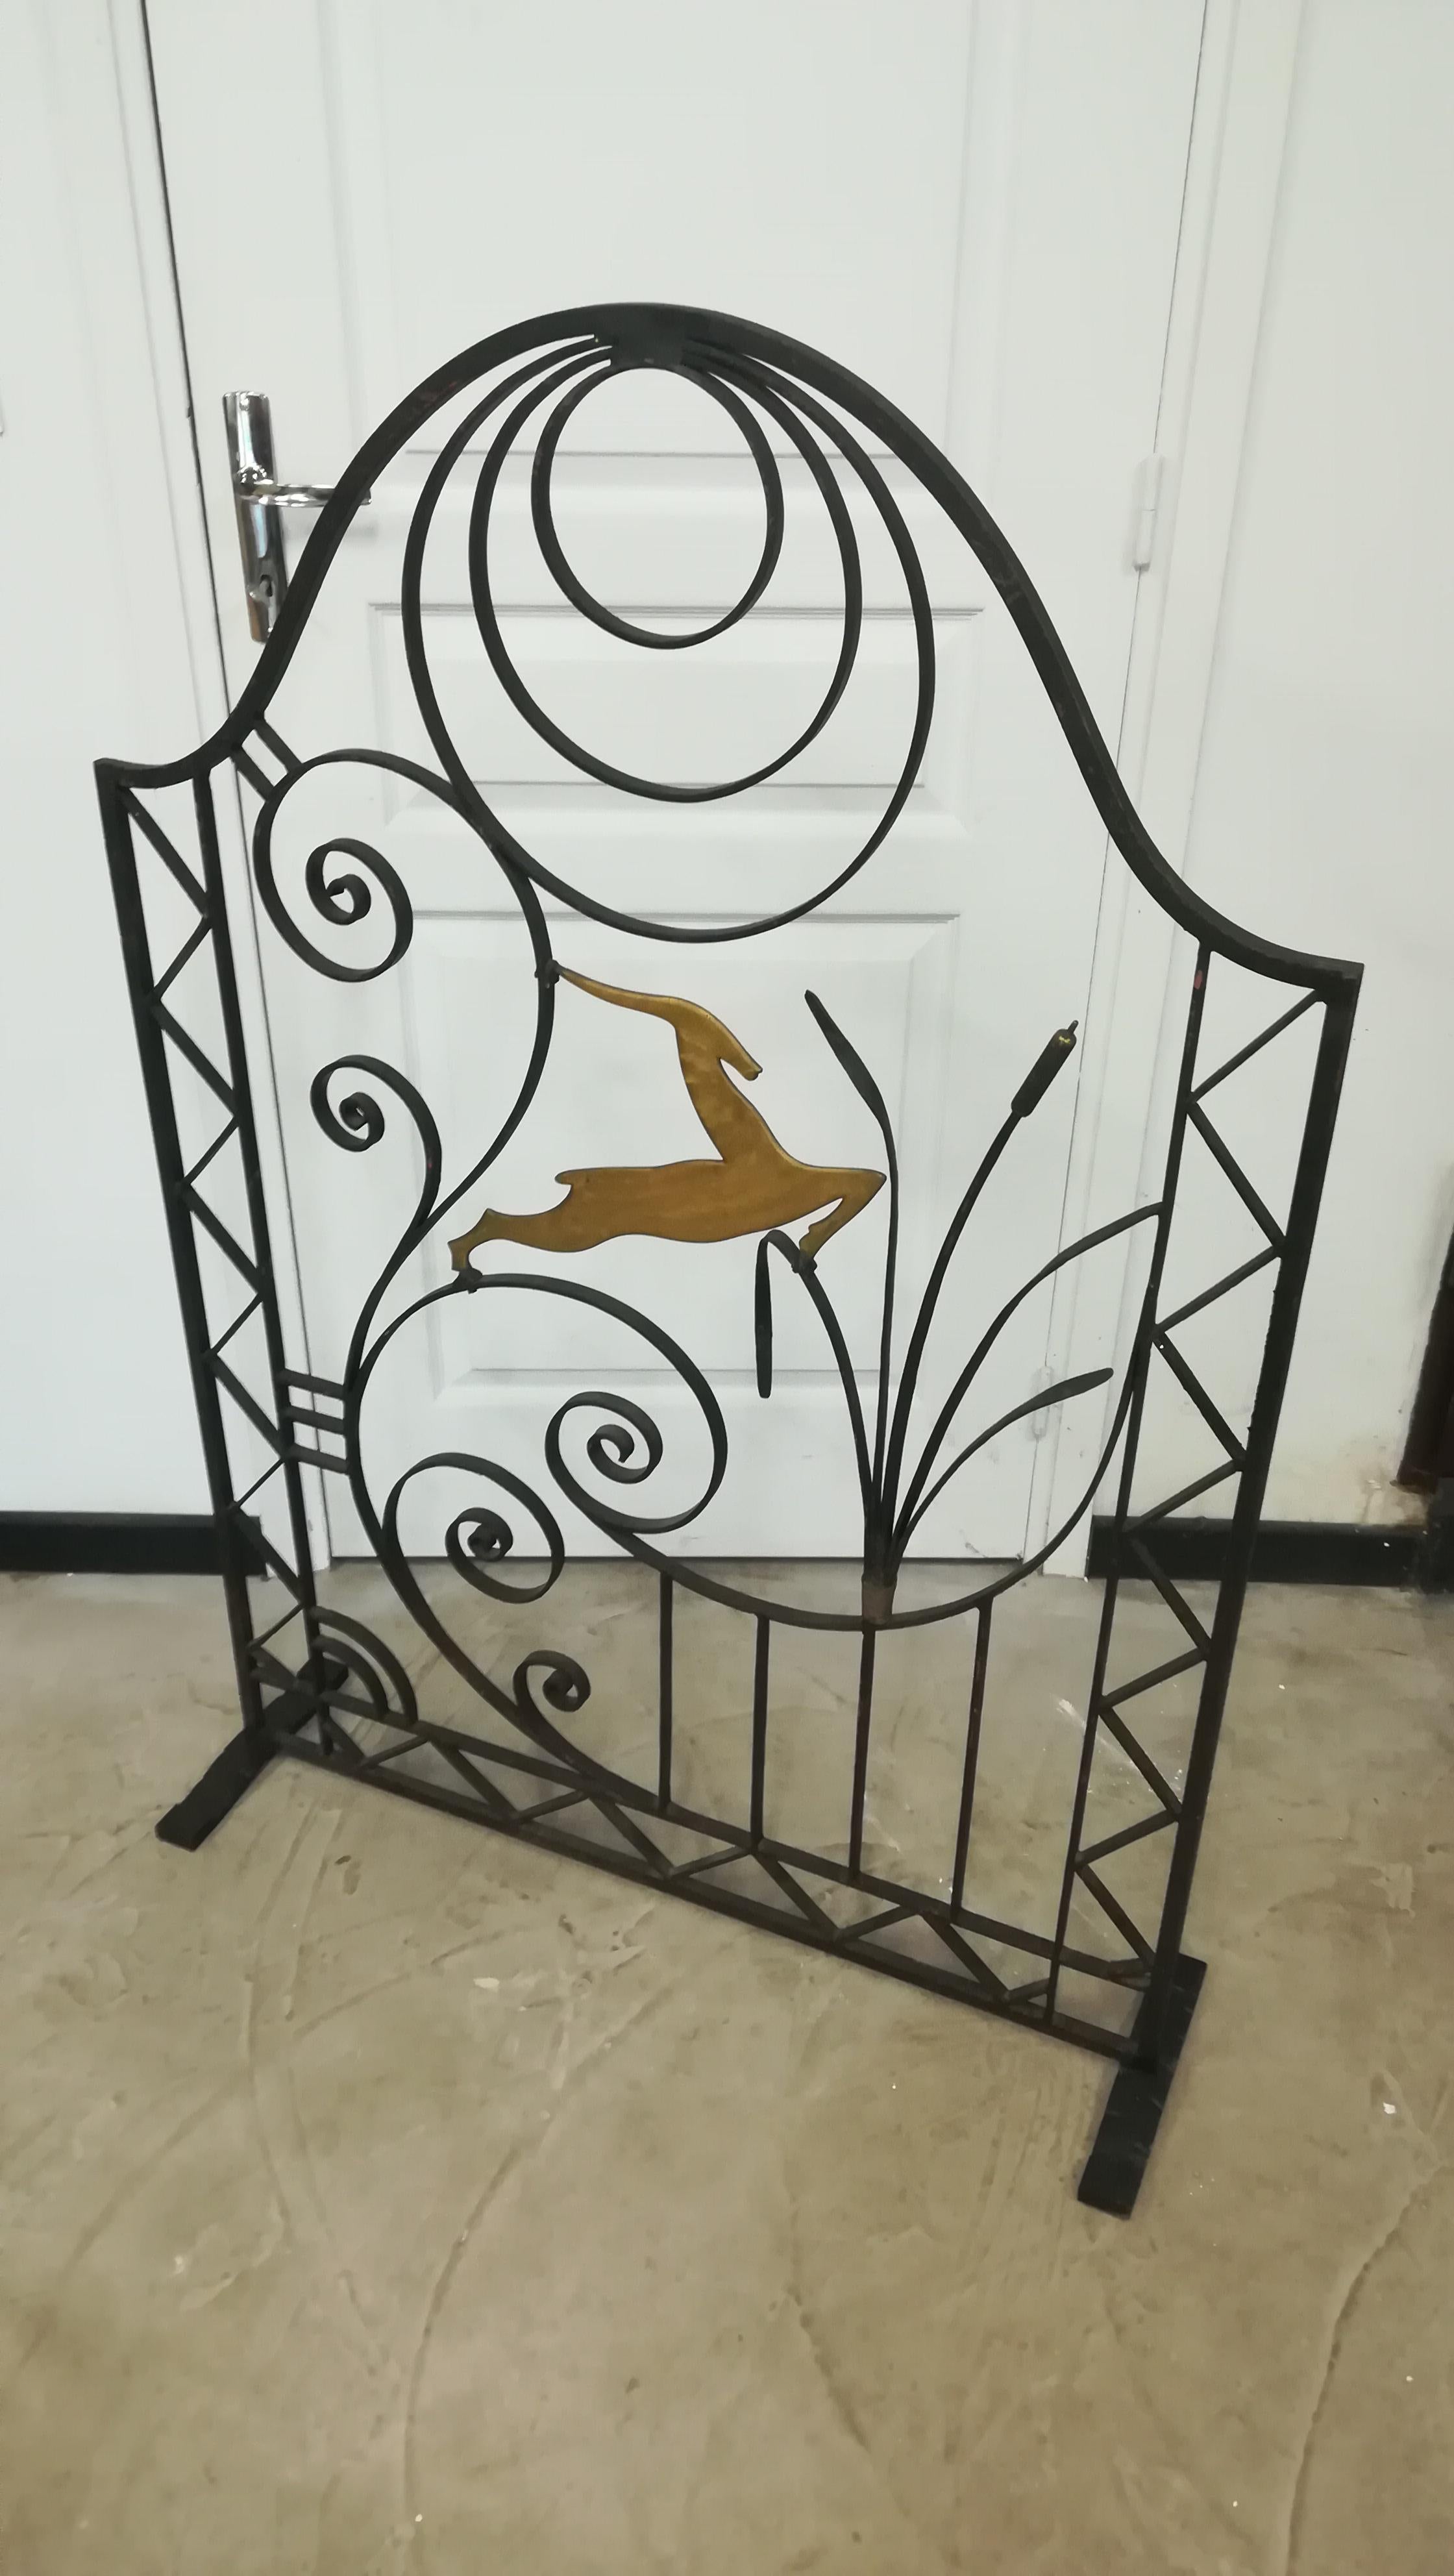 Art Deco wrought iron fire screen, with golden antelope, double sided.
Measures: Thickness 1.5cm.